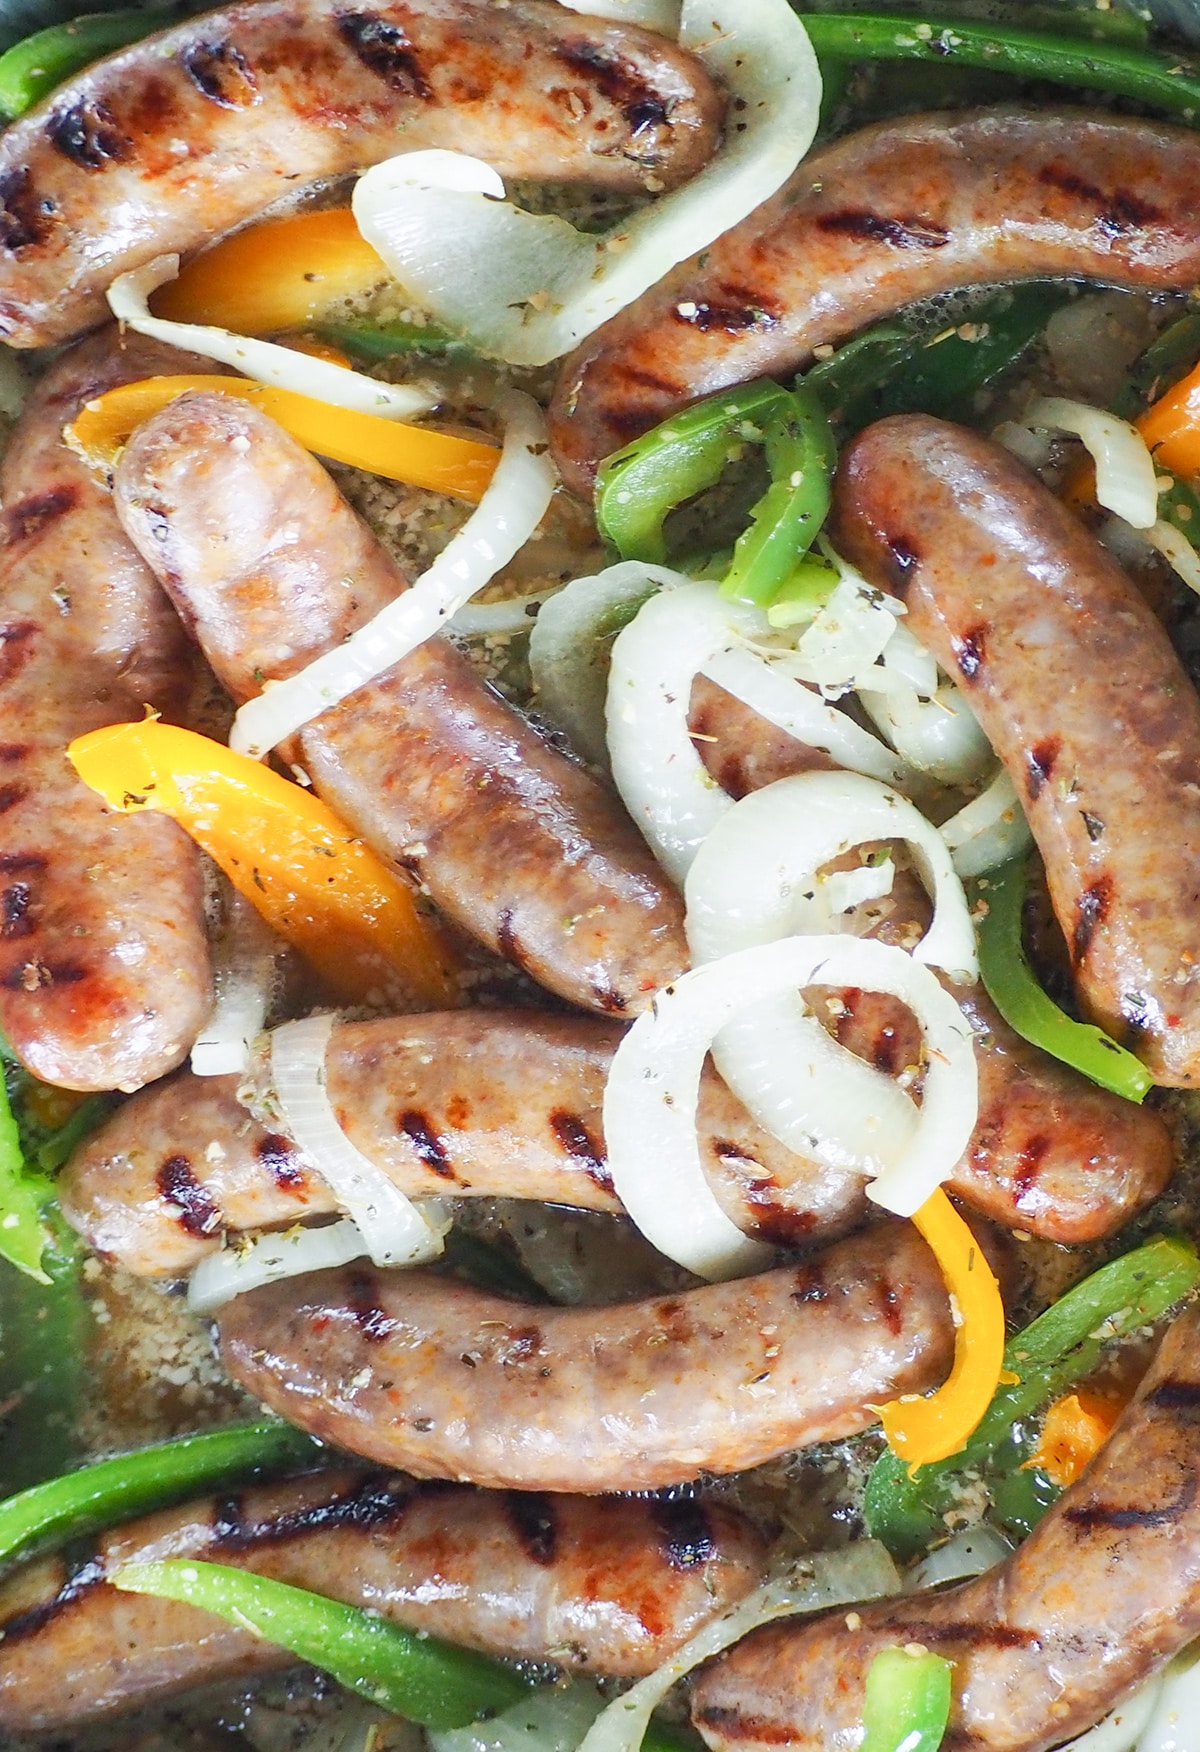 Italian sausages with green peppers and onions braising in beer